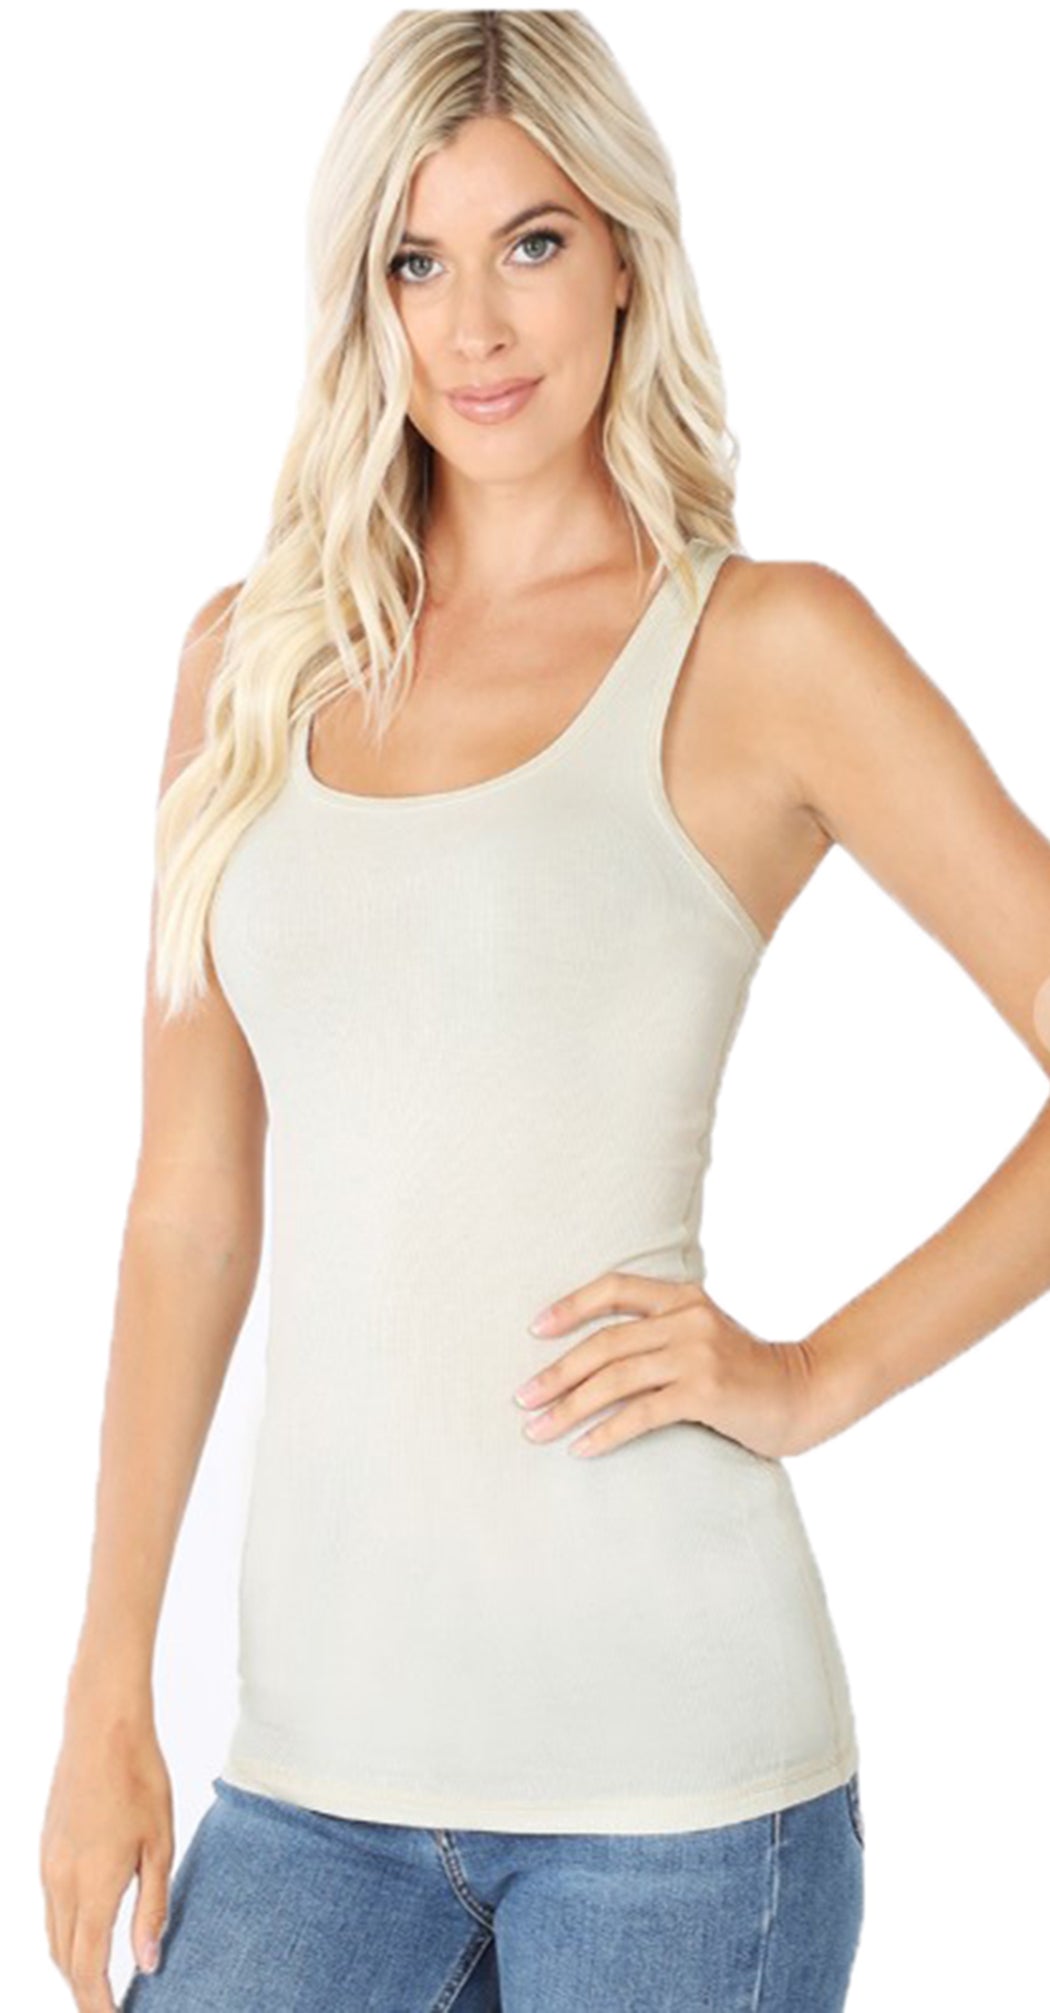 Women Lightweight Cotton Scooped Neckline Stretchy Racerback Ribbed Tank top (Plus Size)